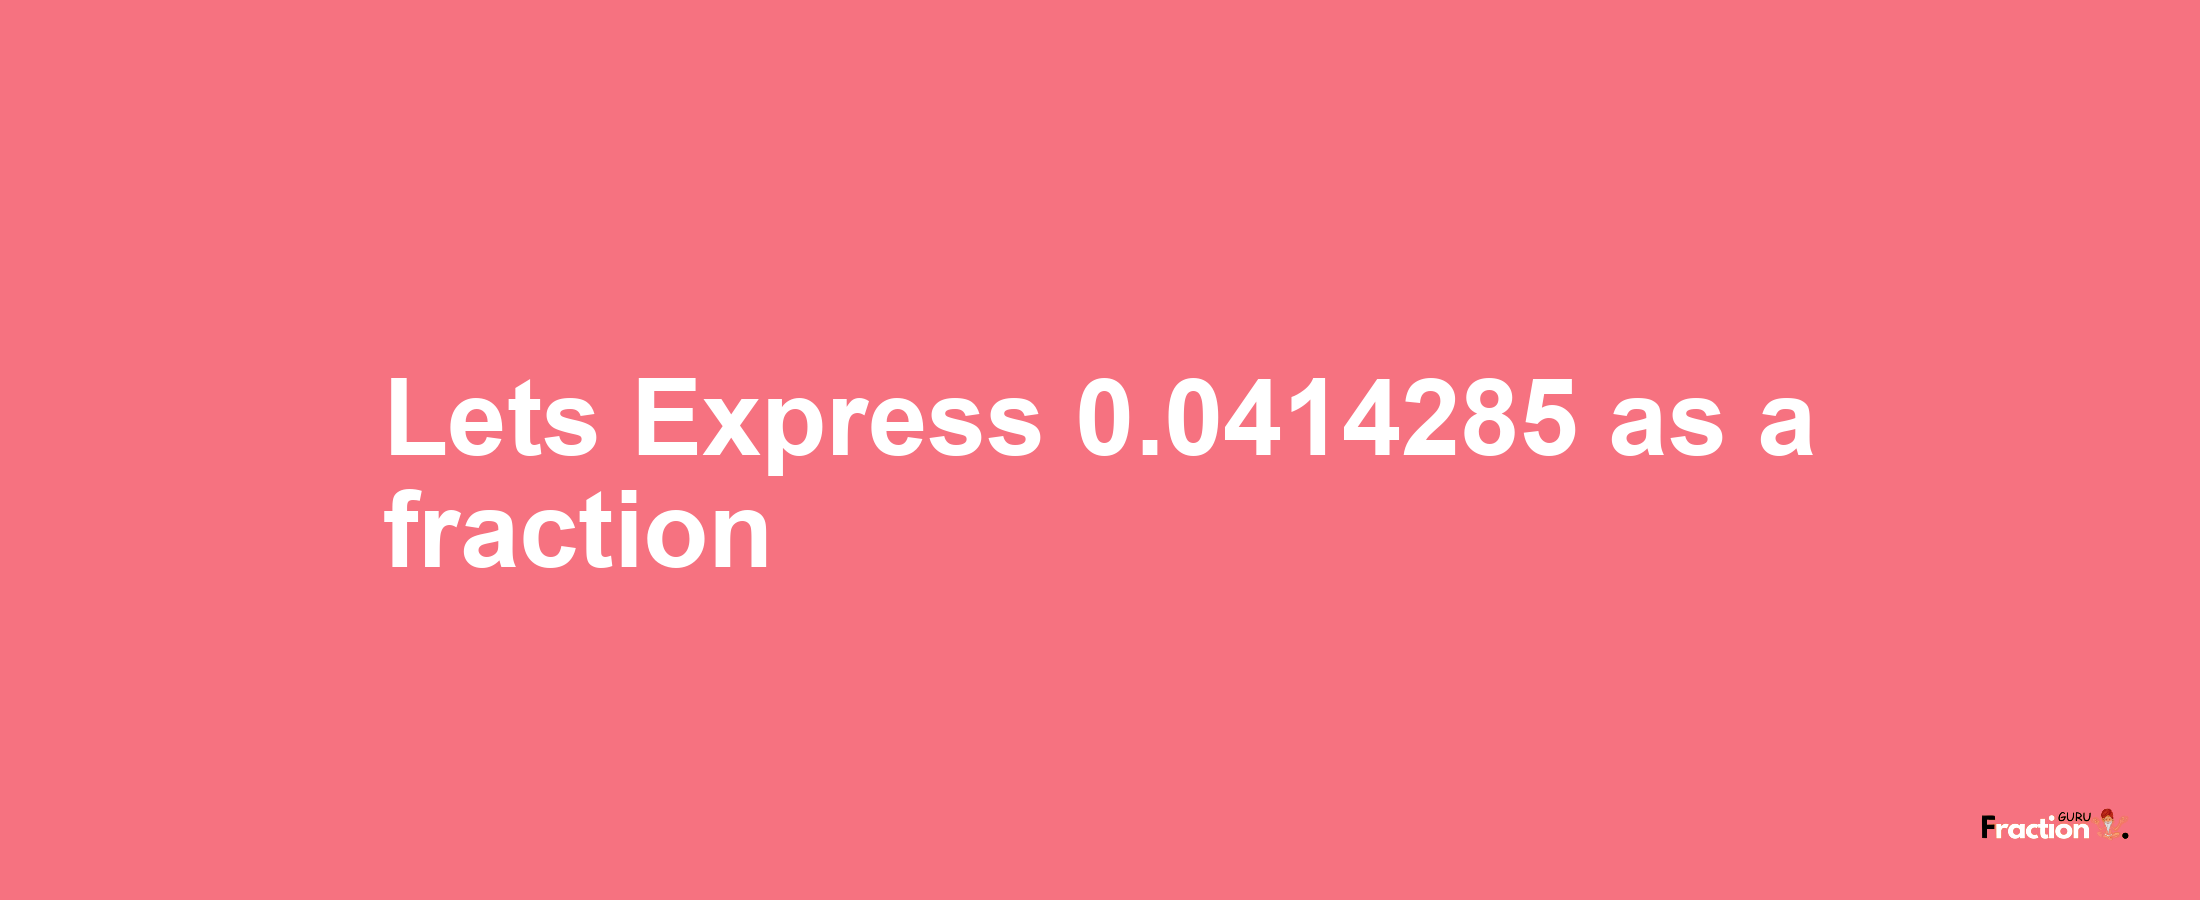 Lets Express 0.0414285 as afraction